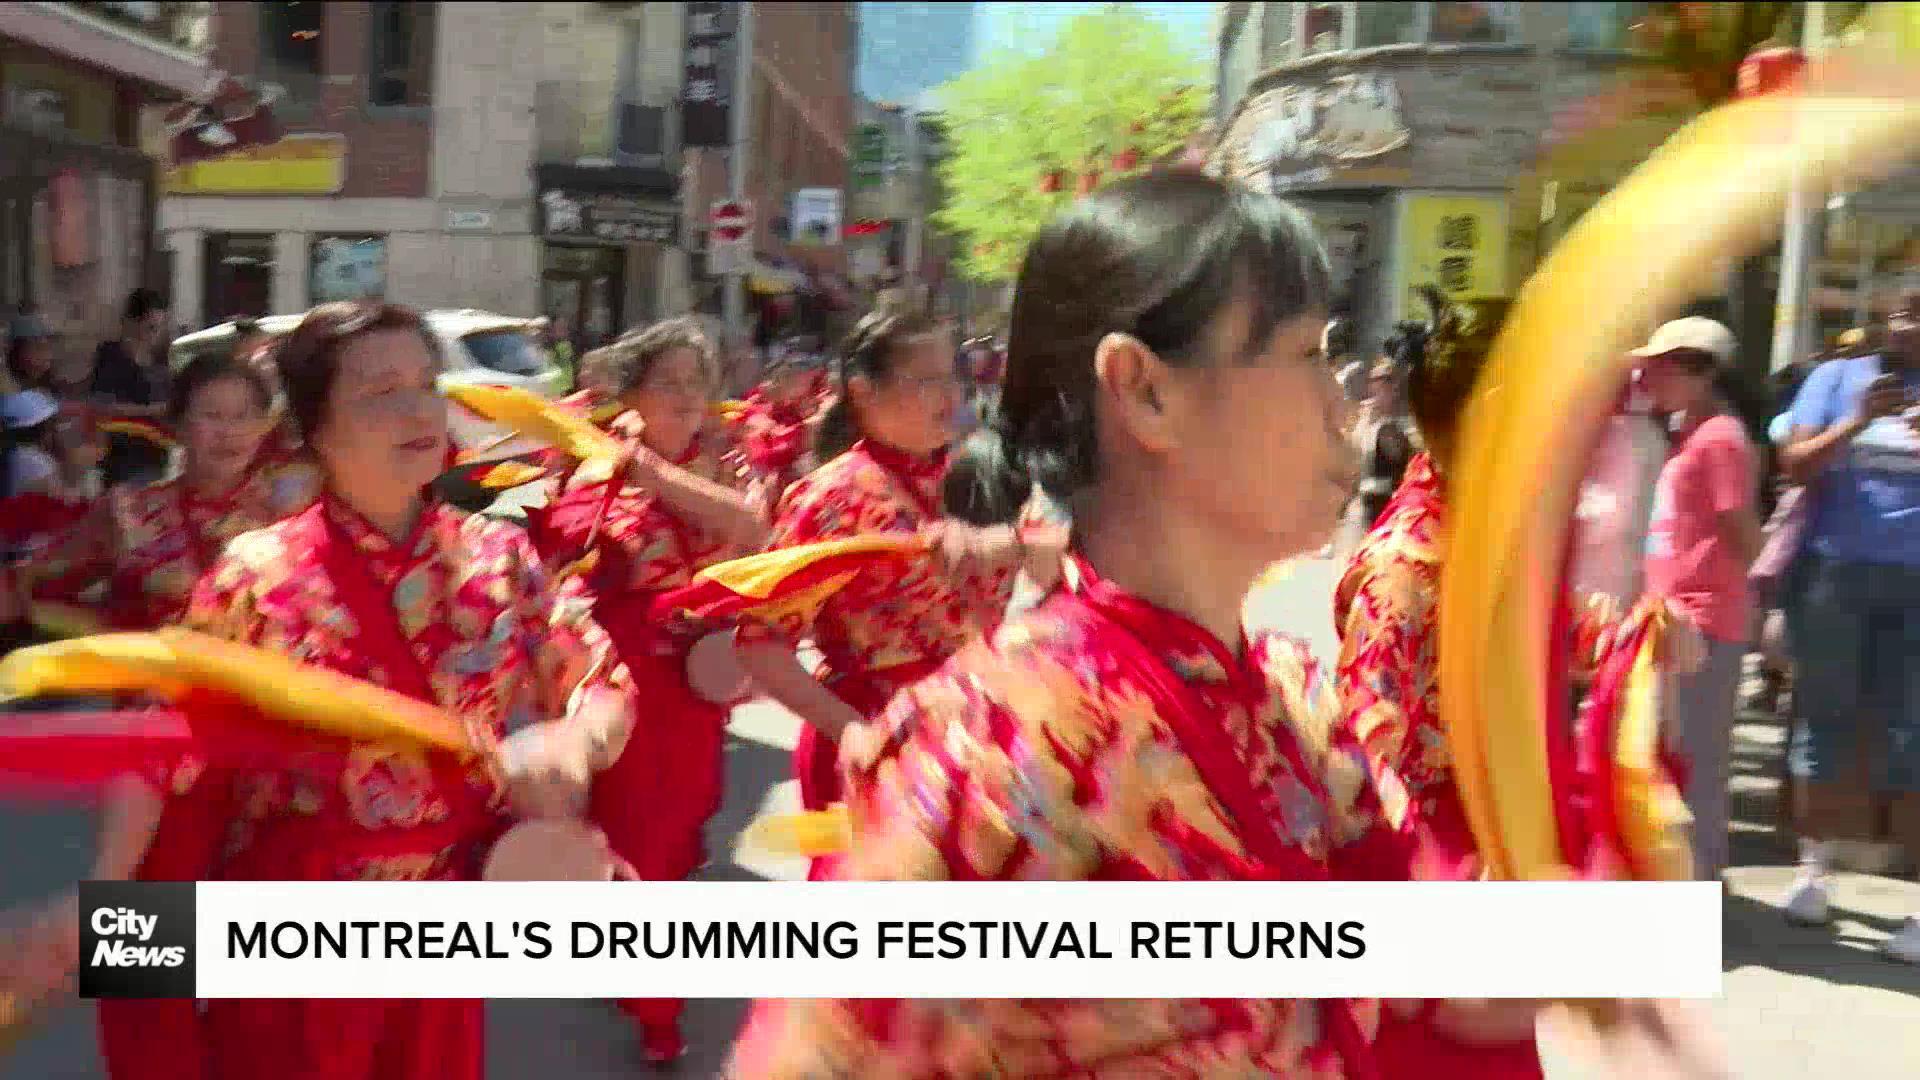 The Multicultural Drumming Festival returns to Montreal's Chinatown